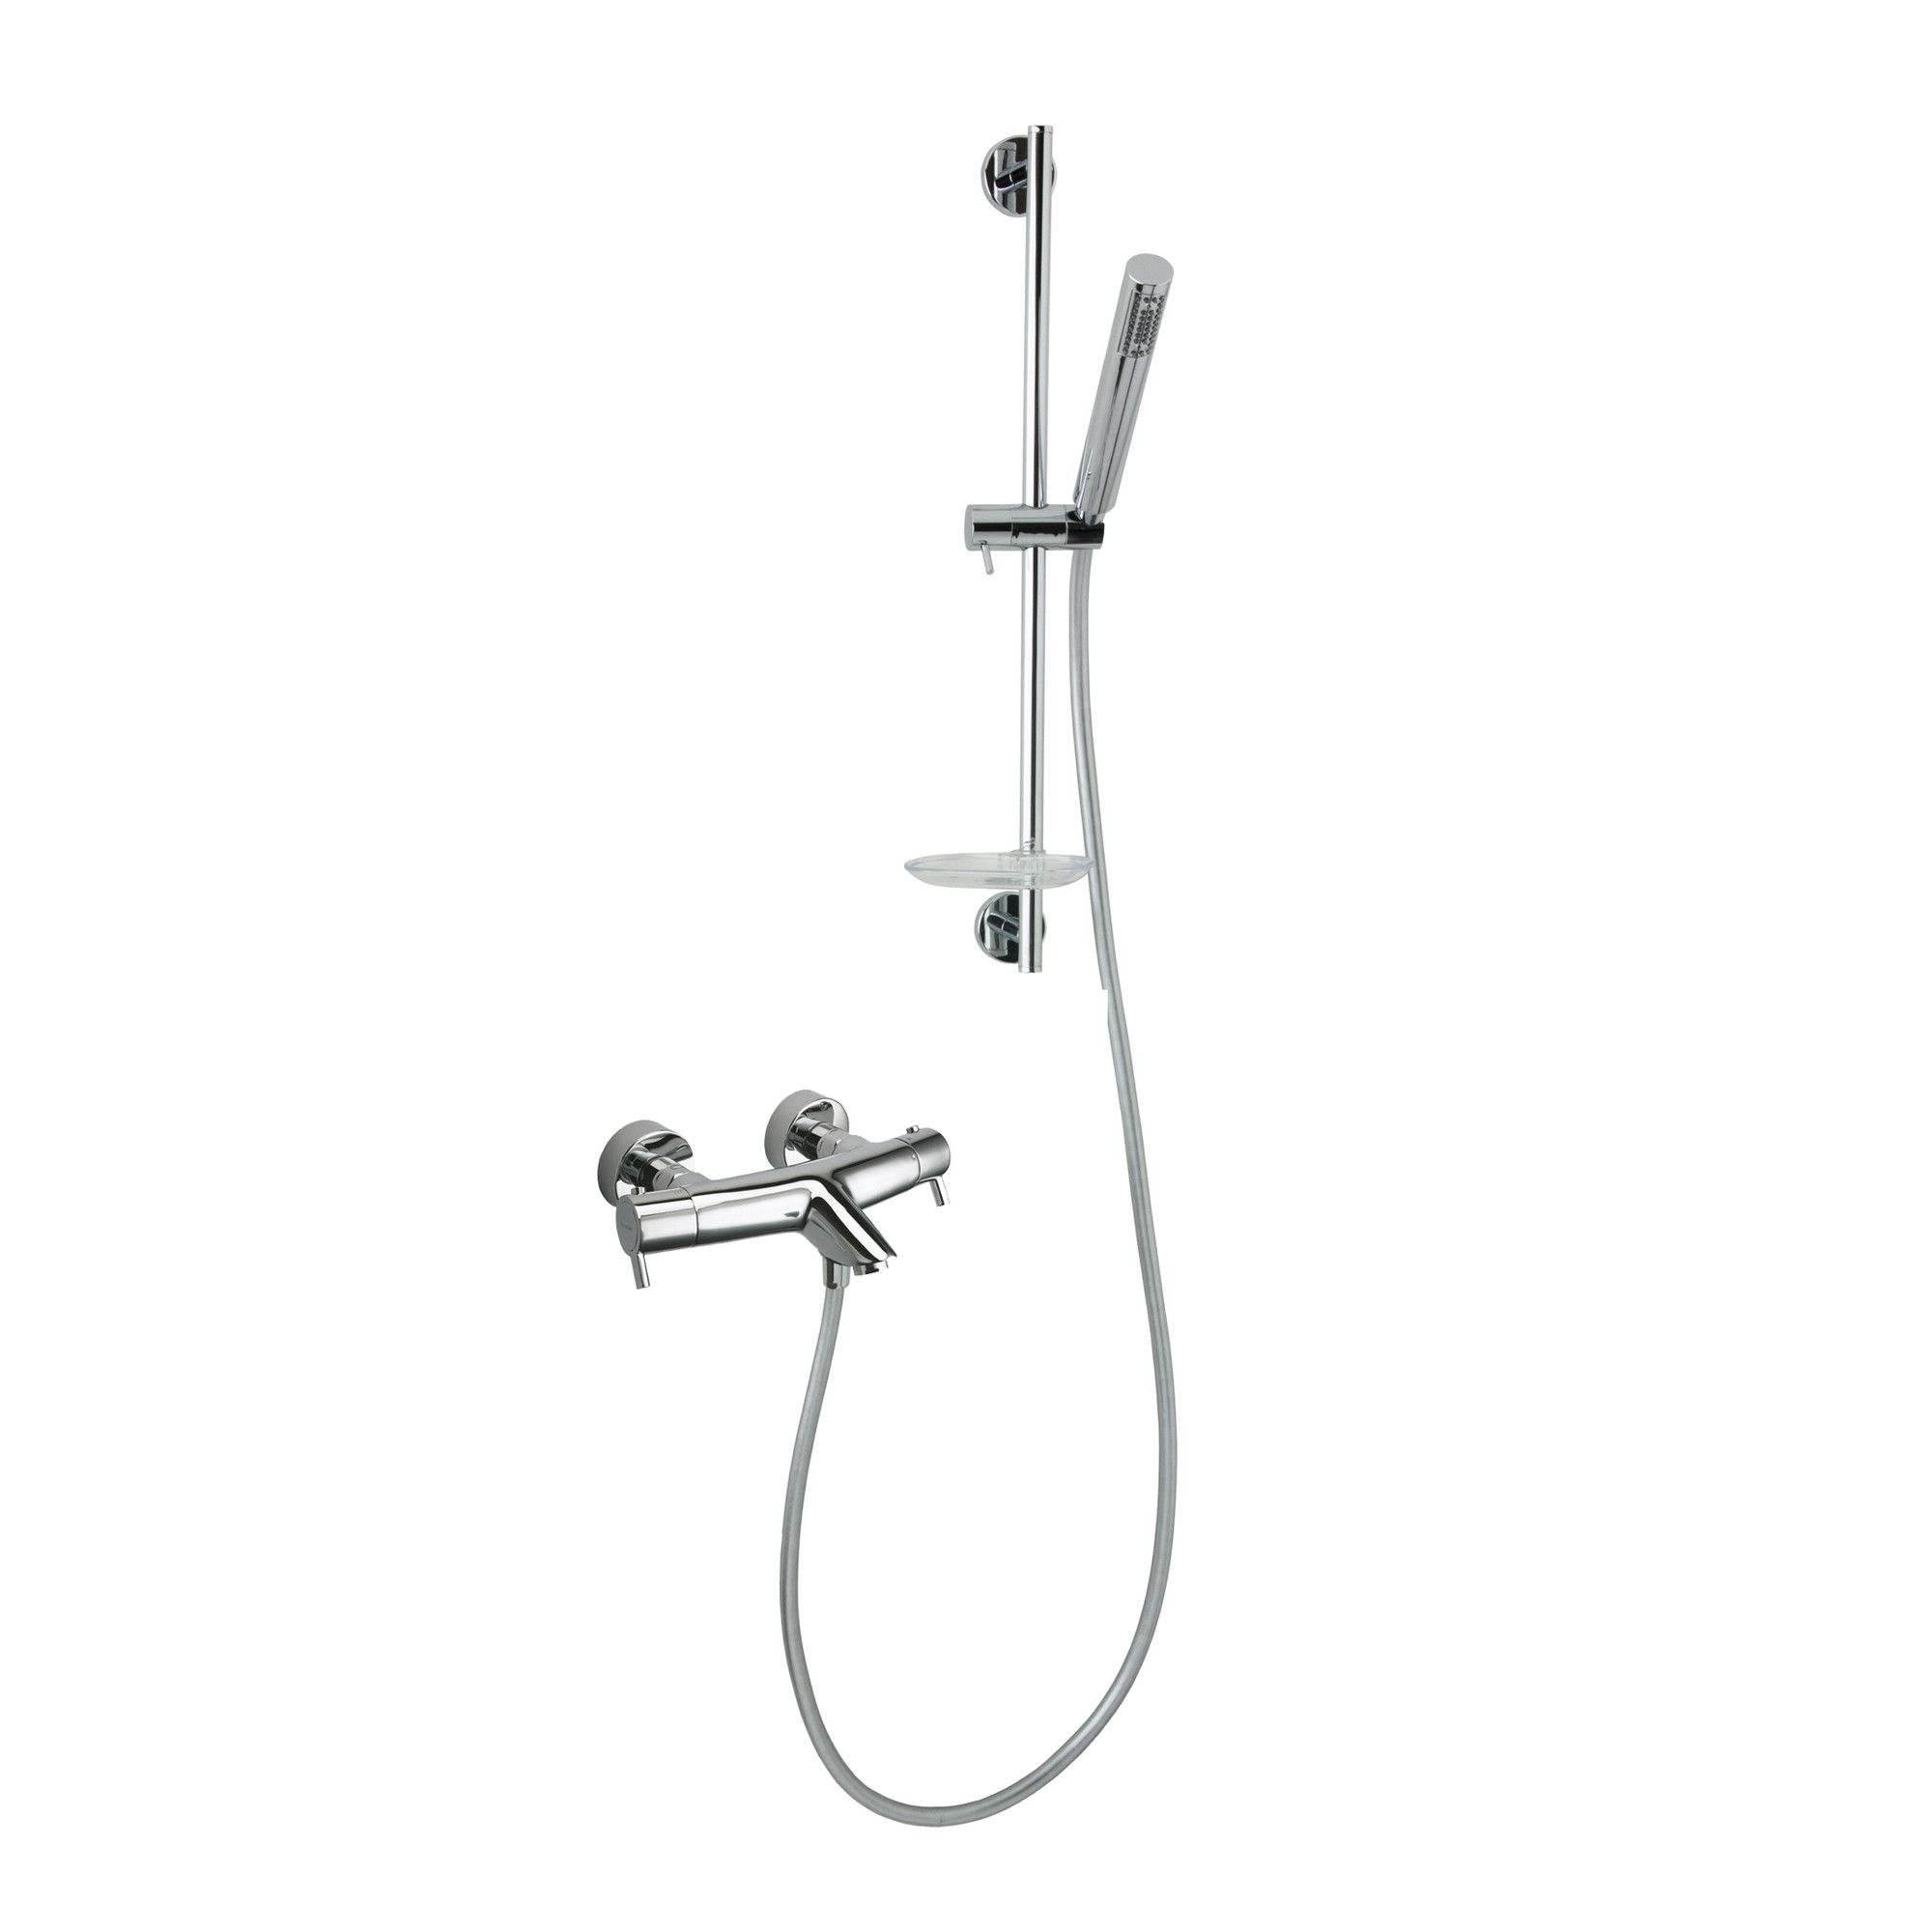 Ramon Soler Thermodrako Exposed Thermostatic Bath/Shower Mixer with Odisea Slide Rail Kit at Tesco Direct